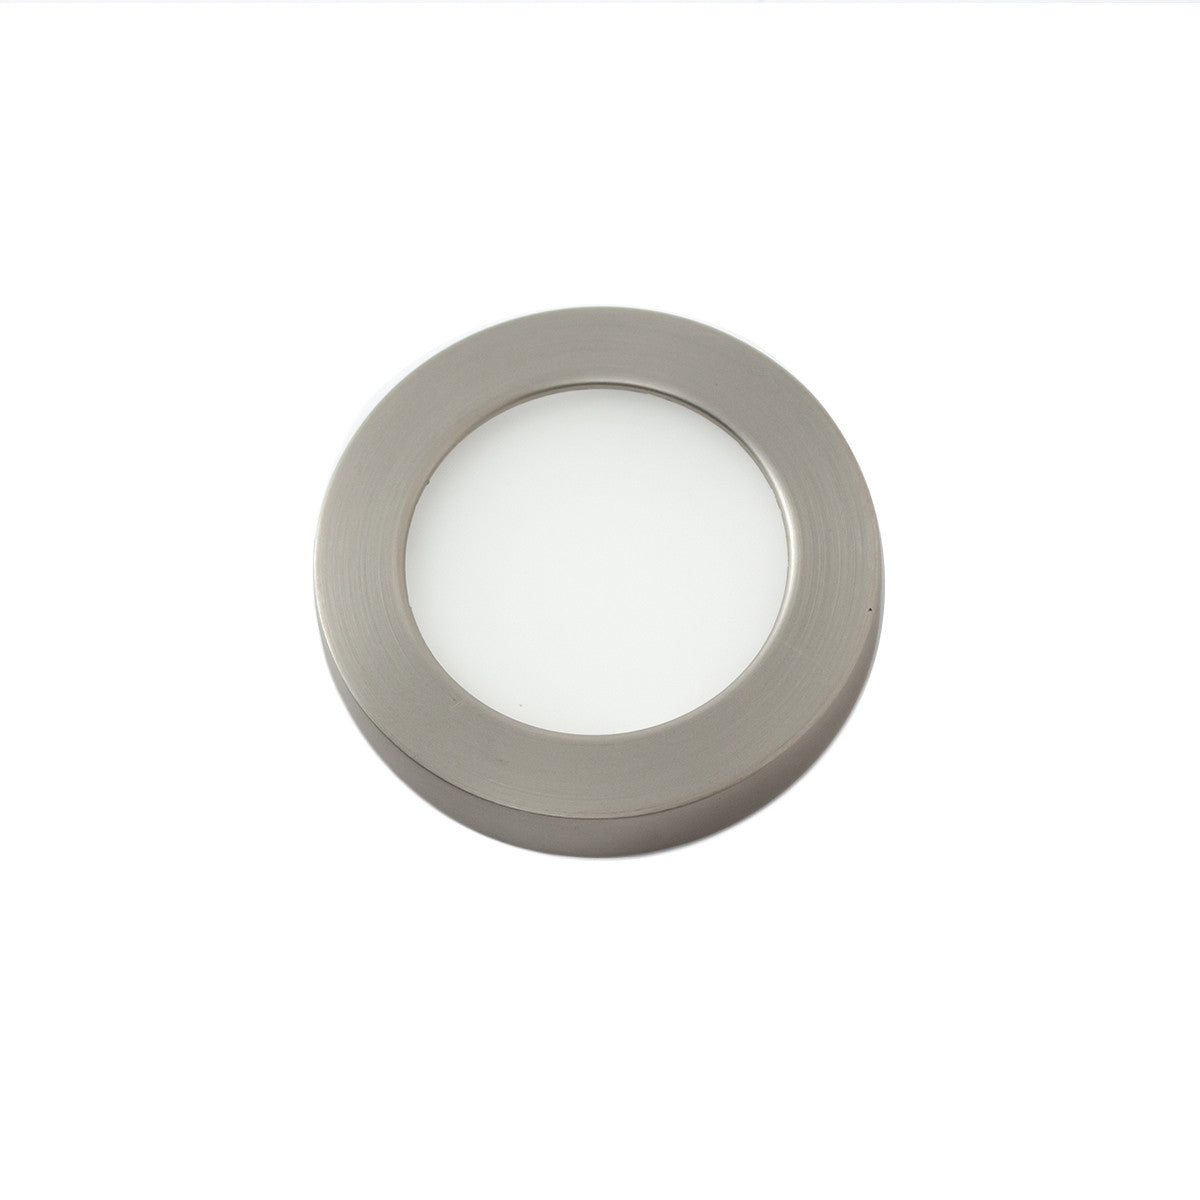 W.A.C. Canada - LED Button Light - Led Button Light - Brushed Nickel- Union Lighting Luminaires Decor